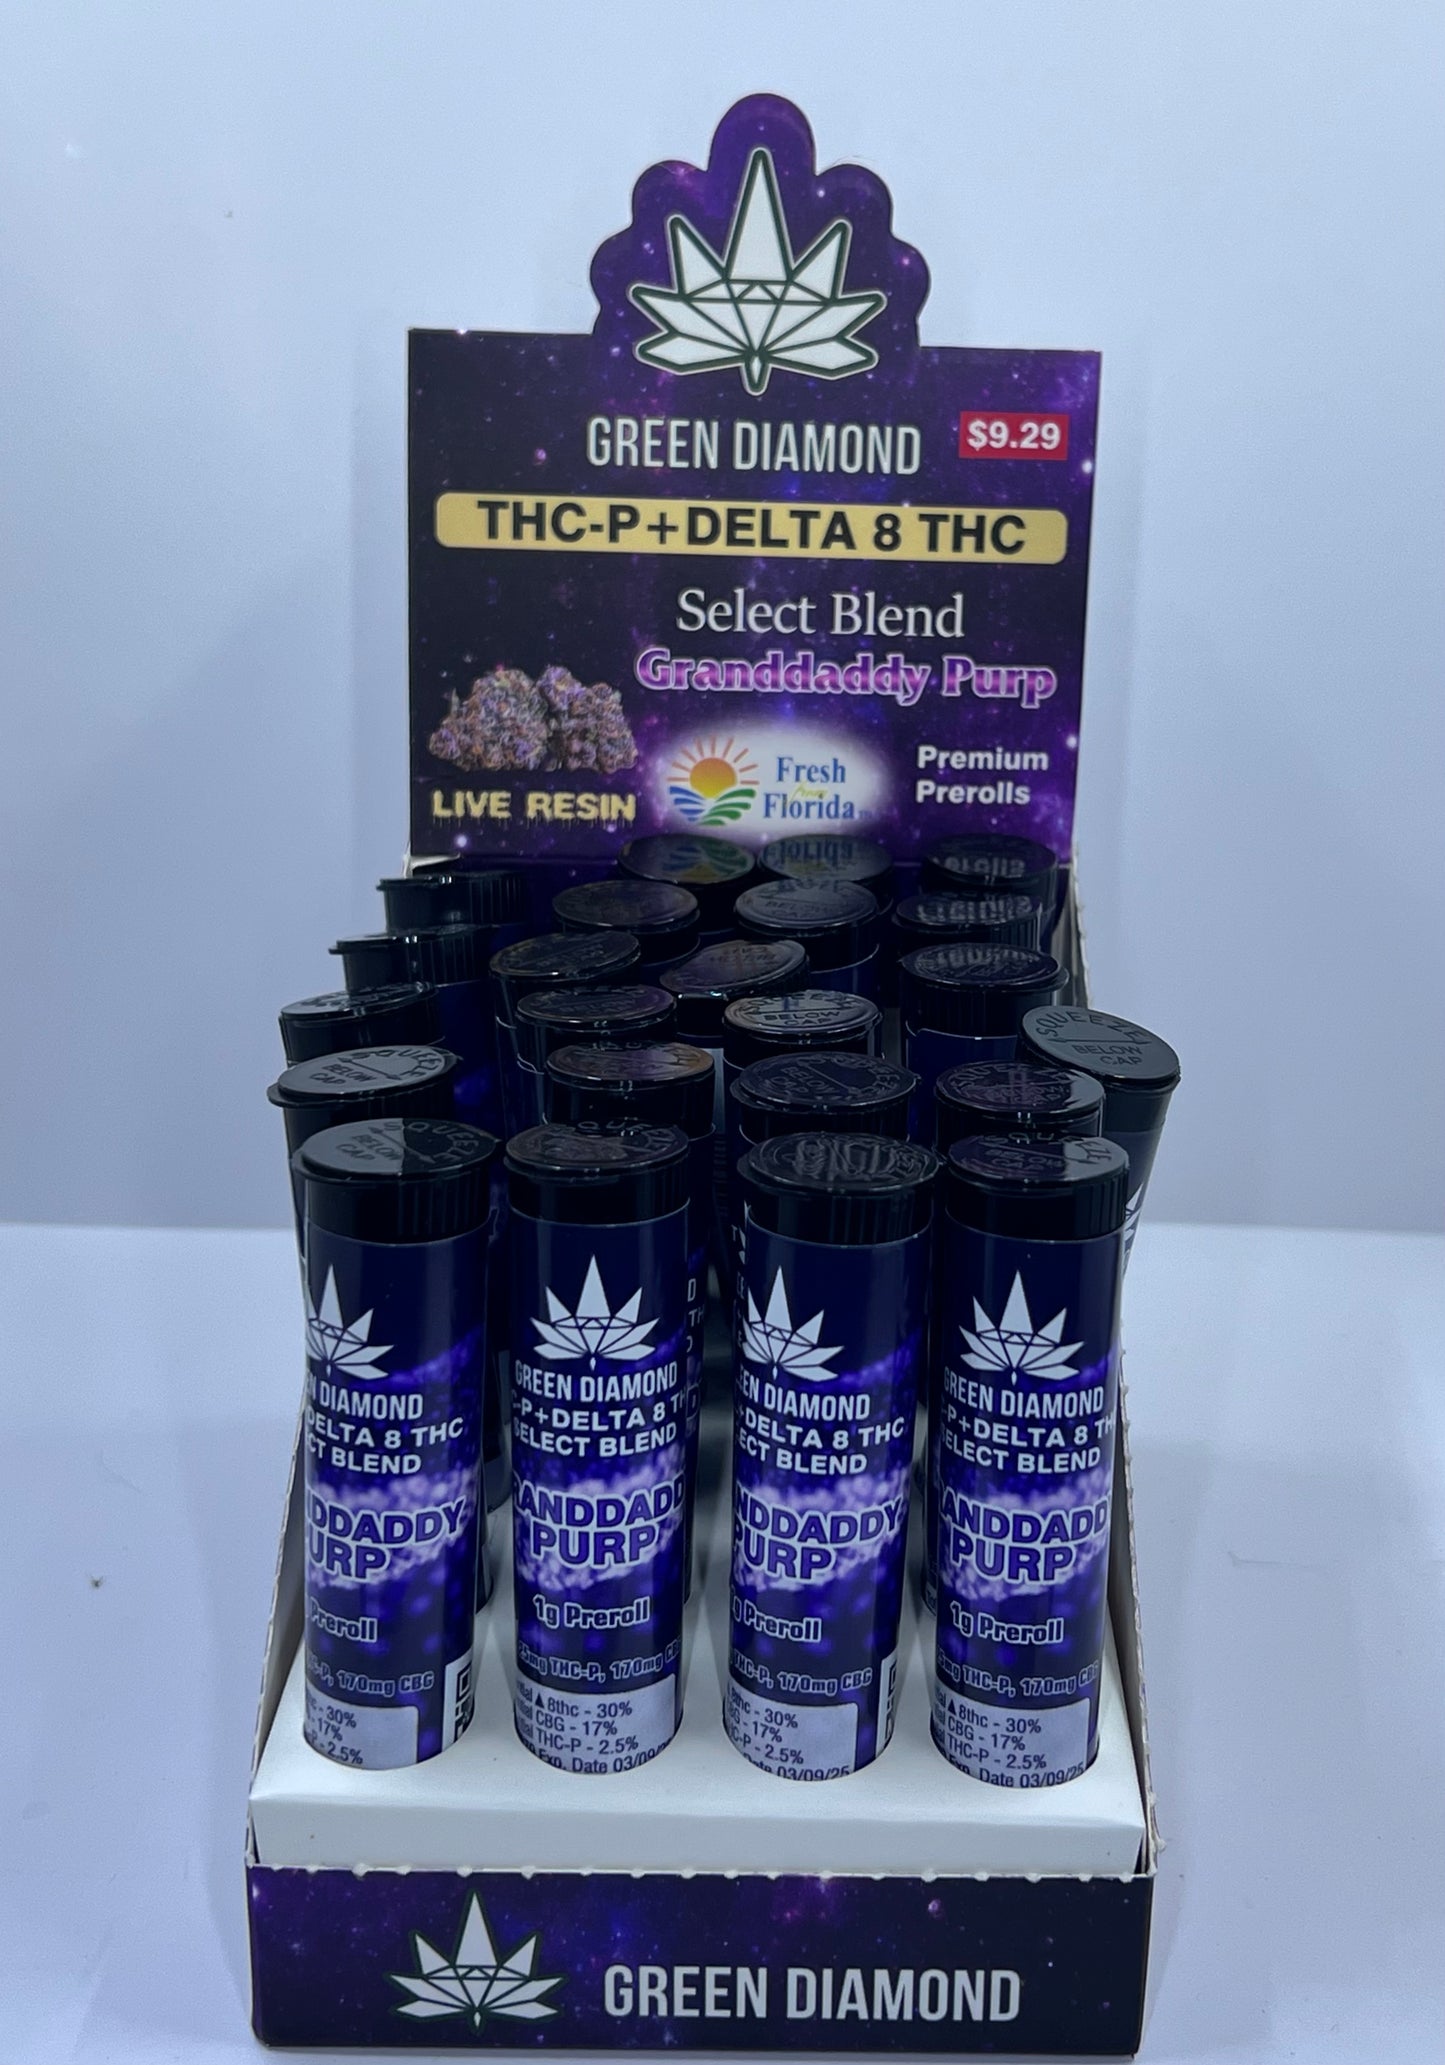 Green Diamond Delta 8 THC + THC-P Granddaddy Purp Pre-Roll yoga smokes yoga studio, delivery, delivery near me, yoga smokes smoke shop, find smoke shop, head shop near me, yoga studio, headshop, head shop, local smoke shop, psl, psl smoke shop, smoke shop, smokeshop, yoga, yoga studio, dispensary, local dispensary, smokeshop near me, port saint lucie, florida, port st lucie, lounge, life, highlife, love, stoned, highsociety. Yoga Smokes